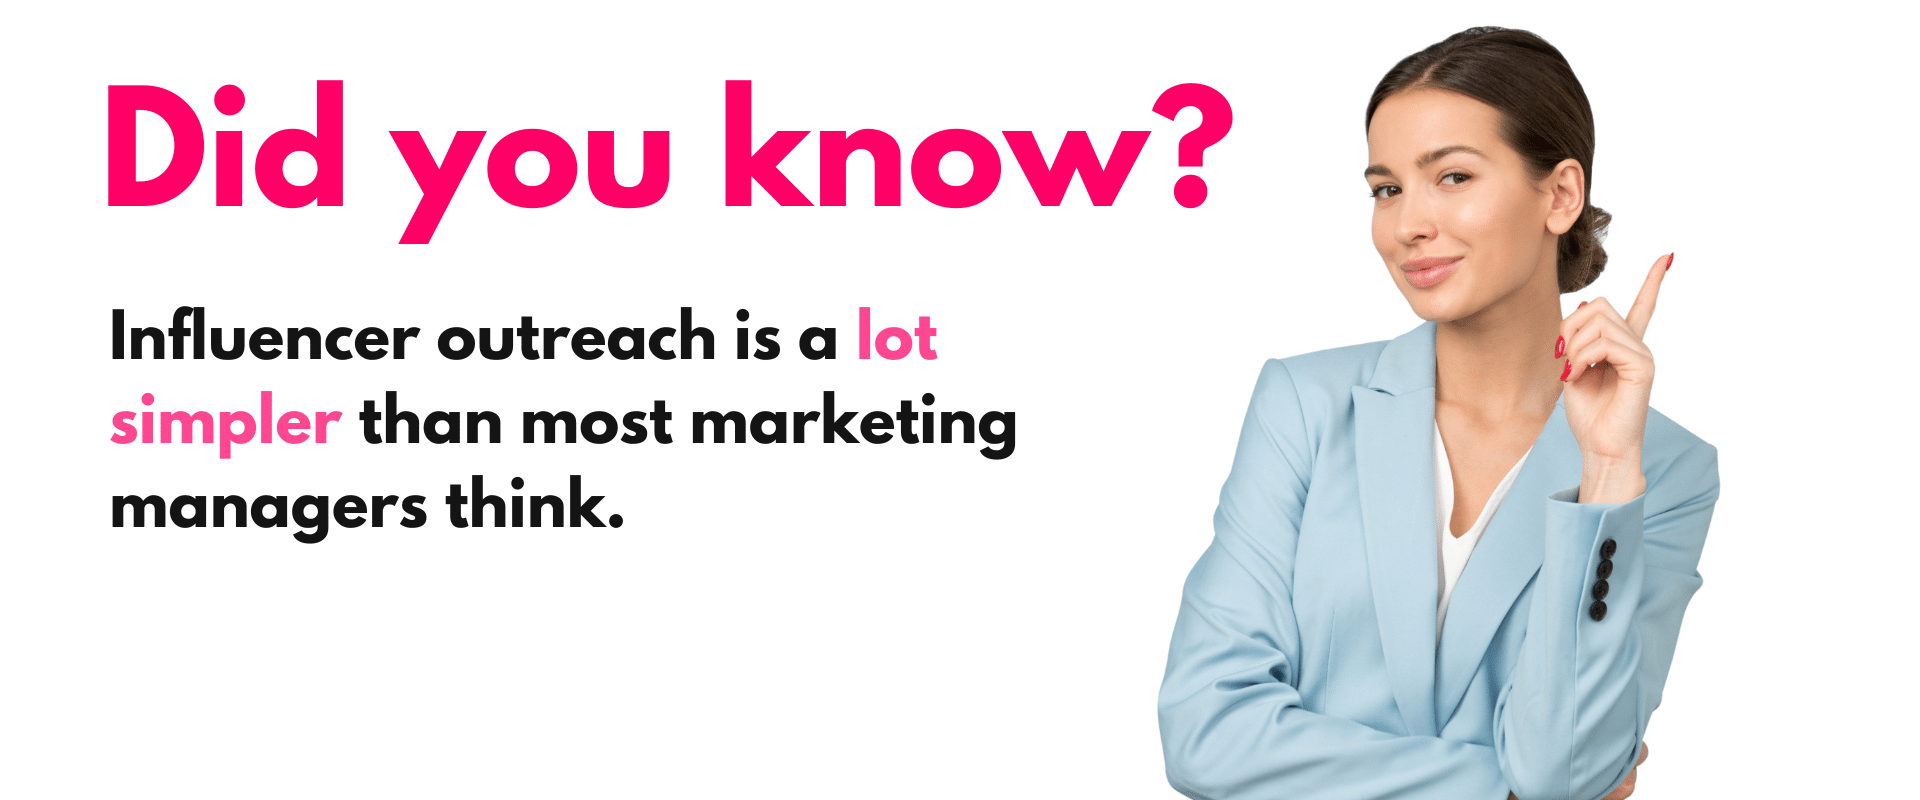 Did you know influencer outreach is a lot simpler than marketing managers marketing thinking?.